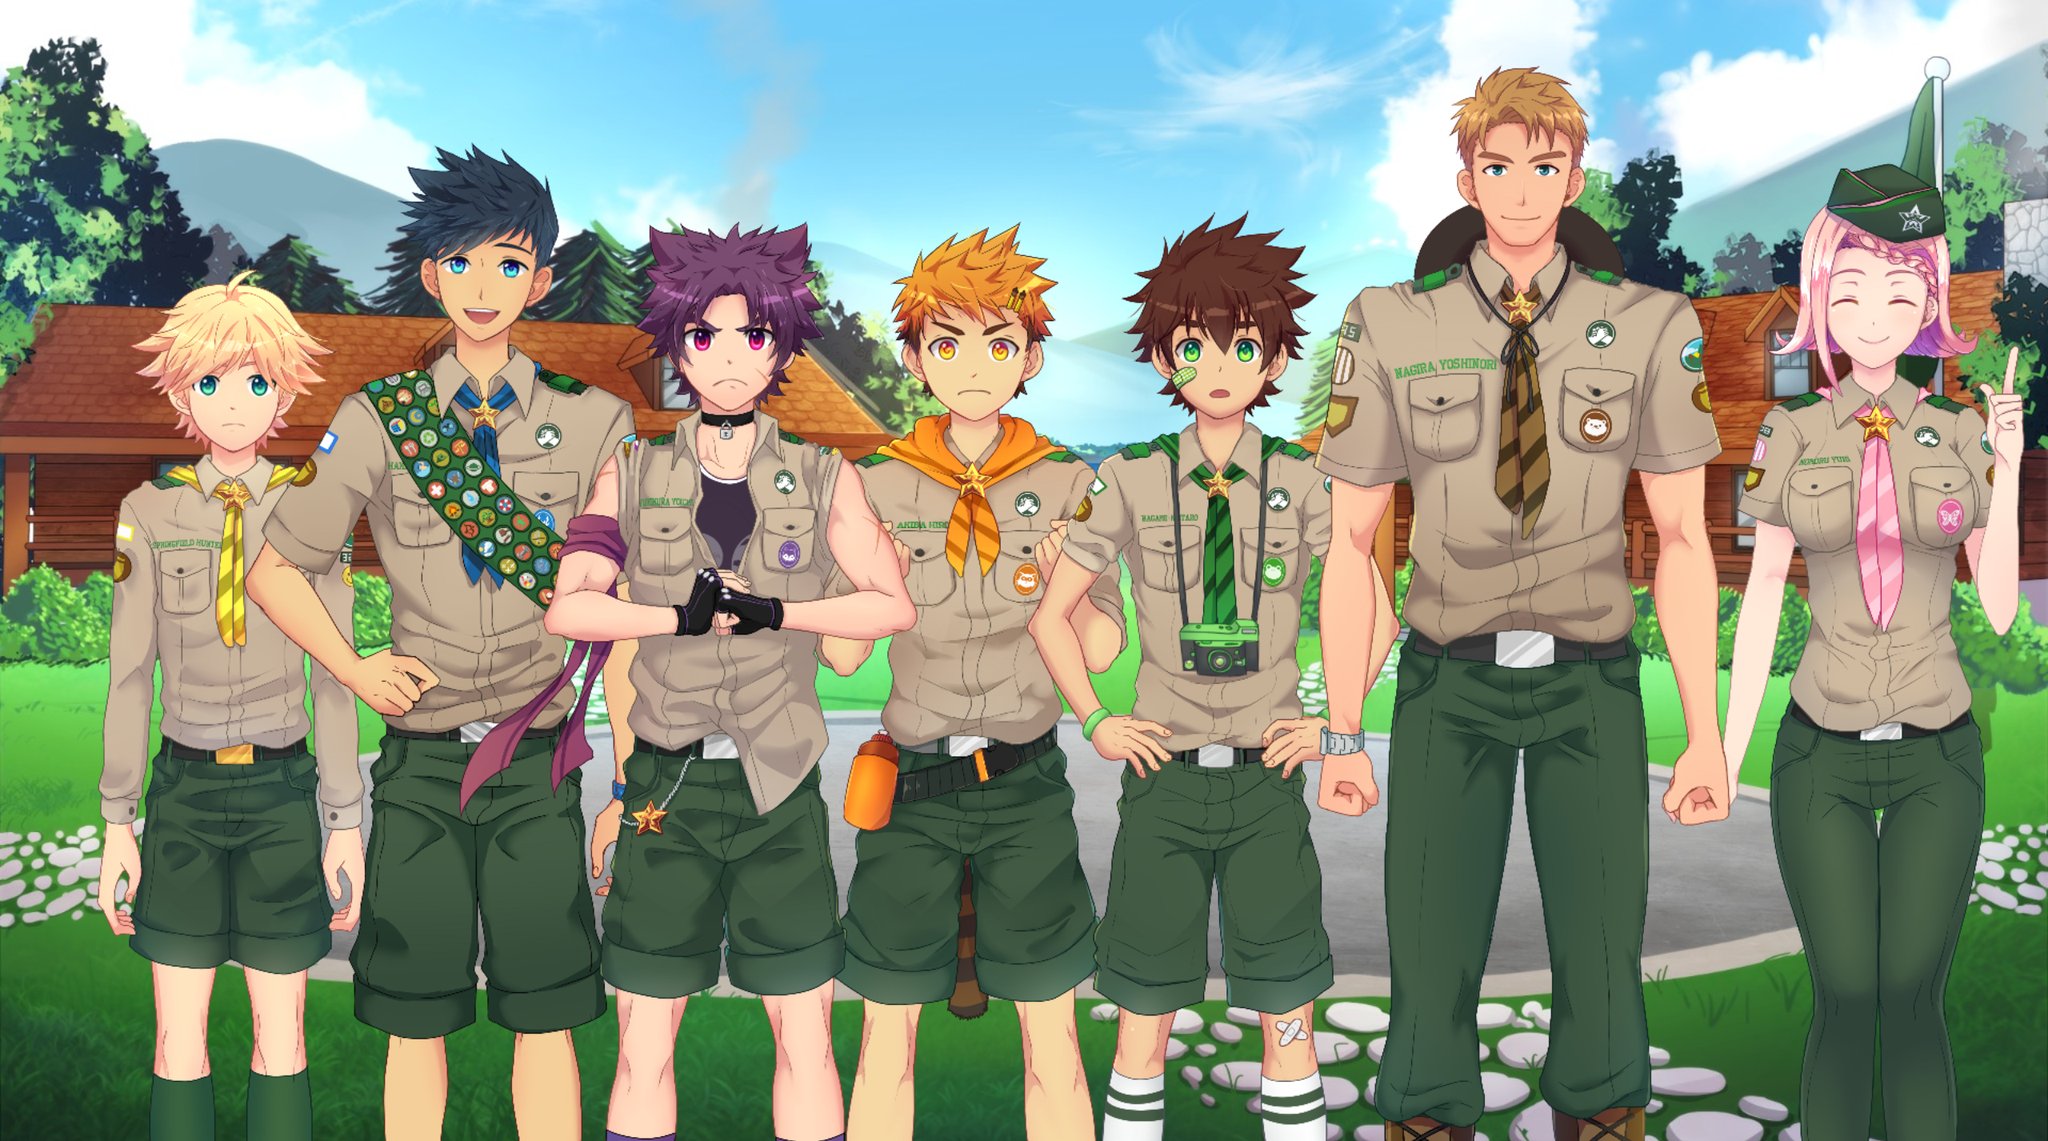 [Camp Buddy] I'm Keitaro Nagame and here with me are scoutmaster Y...